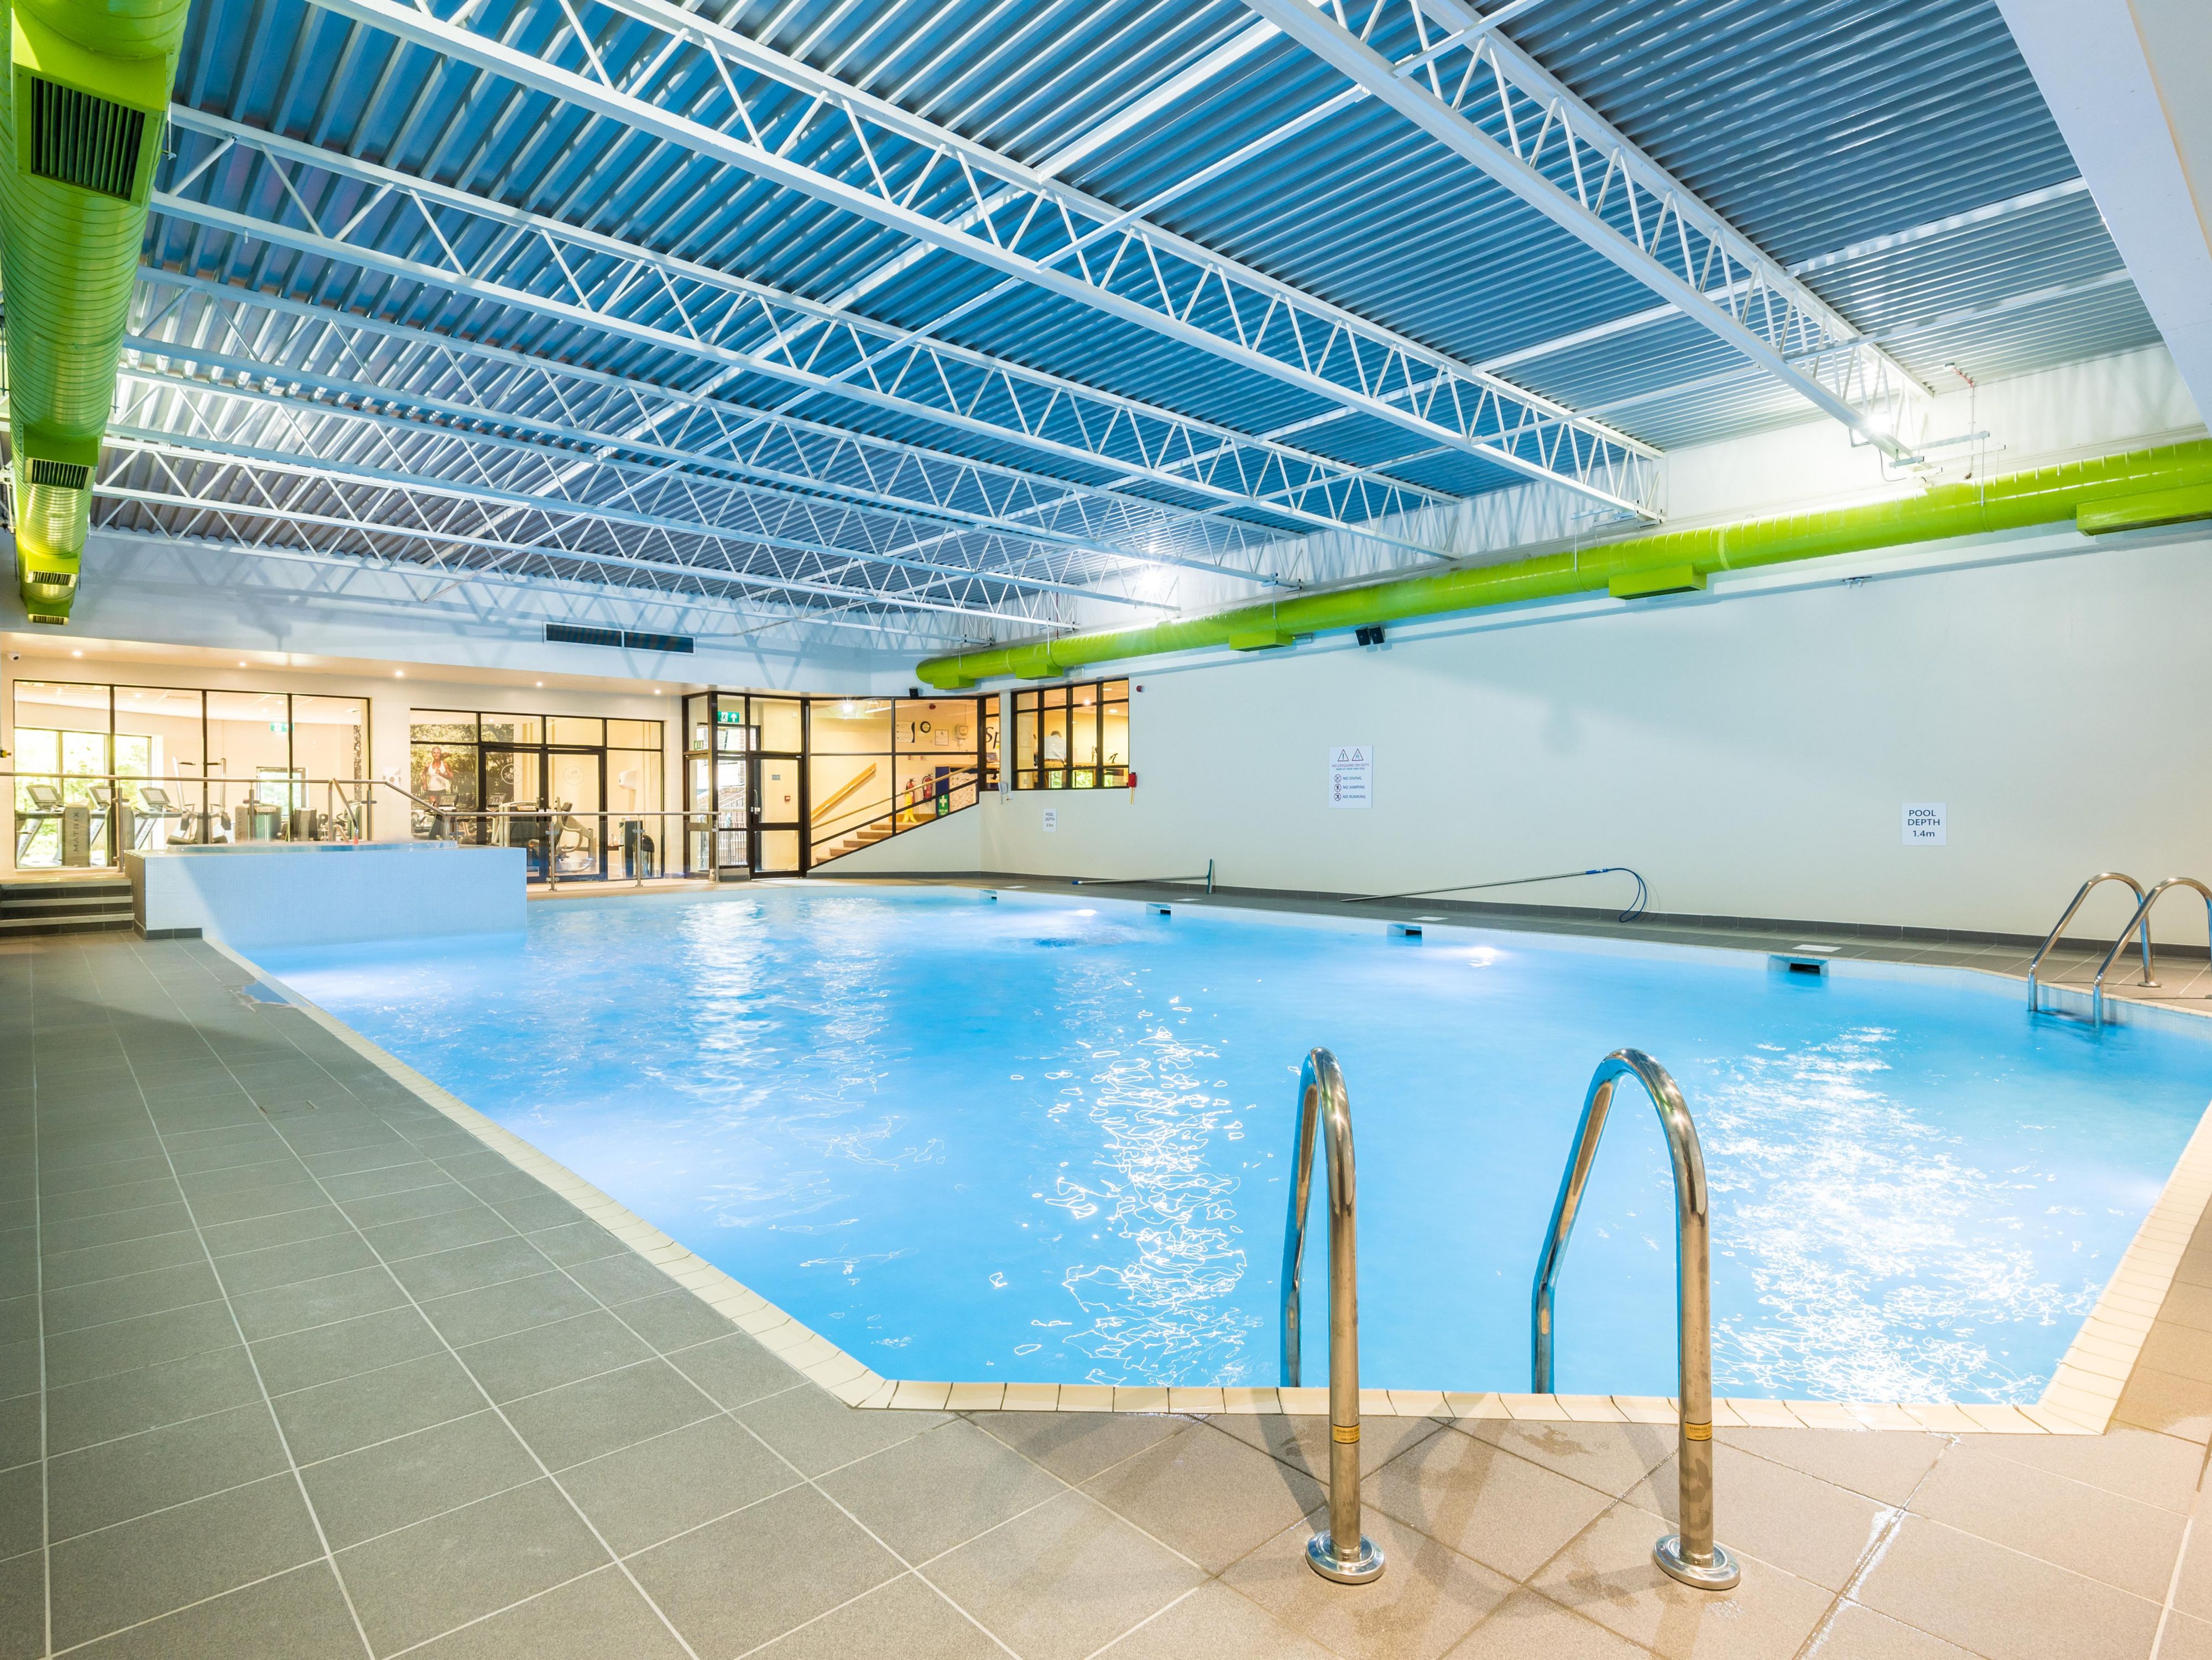 The Holiday Inn Lancaster features a fully-equipped You Fit Health Club. Guests can enjoy complimentary use of our leisure club in Lancaster:
A fully-equipped gym
A heated swimming pool
Hot tub
Steam room
Sauna
Group exercise classes*